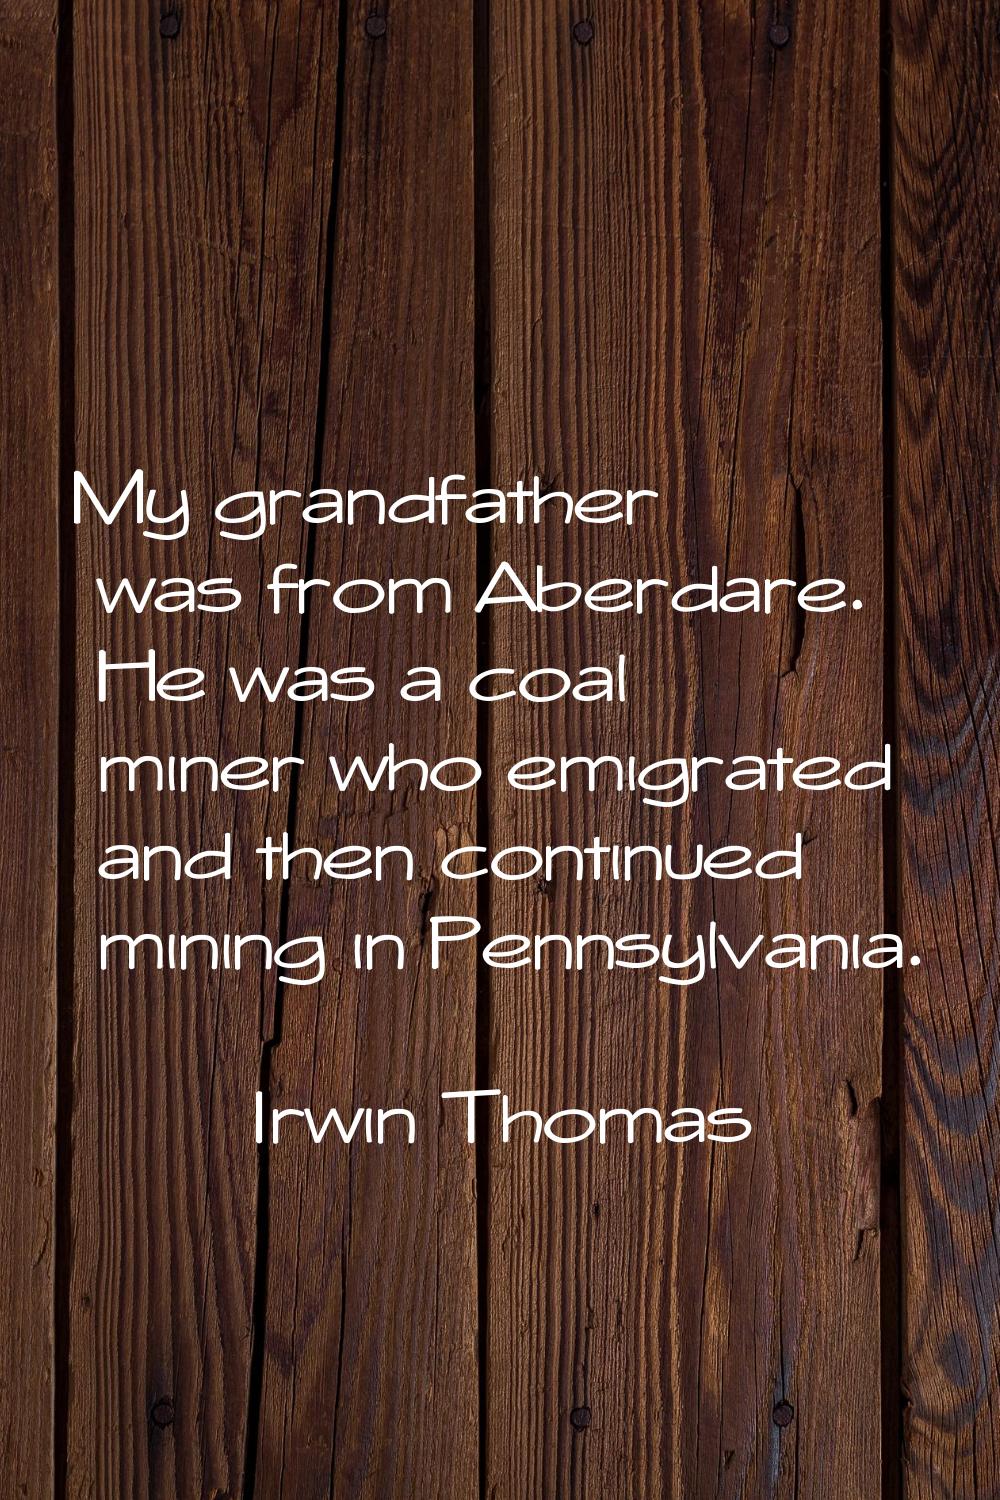 My grandfather was from Aberdare. He was a coal miner who emigrated and then continued mining in Pe